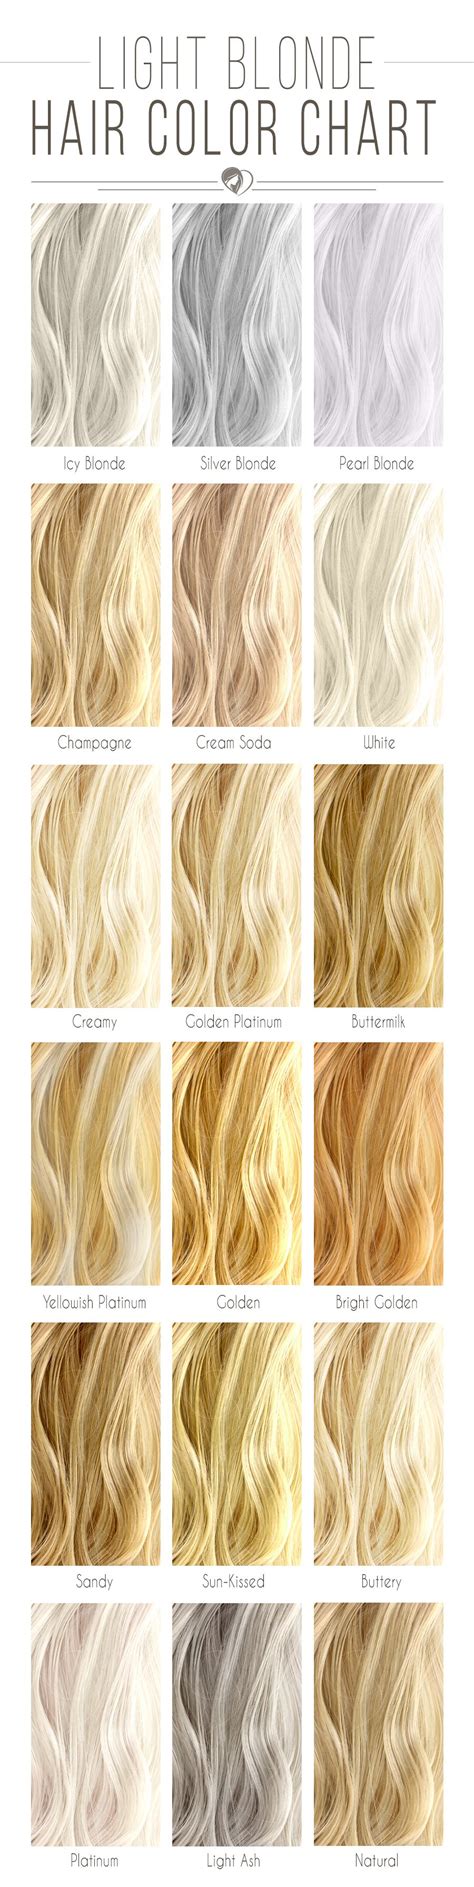 Blonde Hair Color Chart The Shades Kissed By The Sun Hair Color Chart Blonde Hair Color